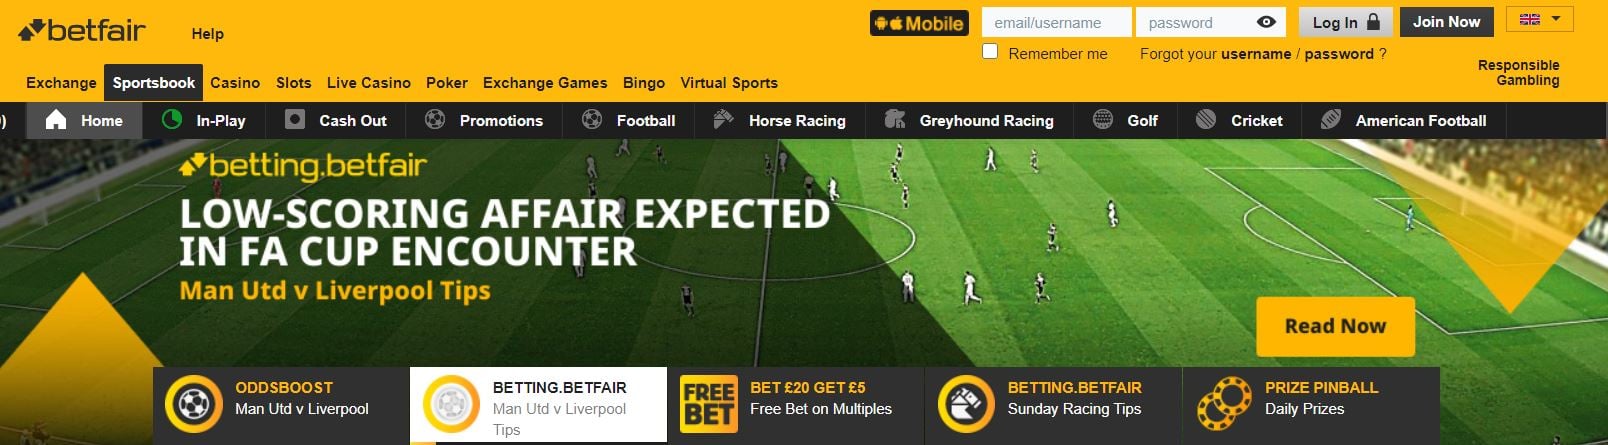 How to register with Betfair